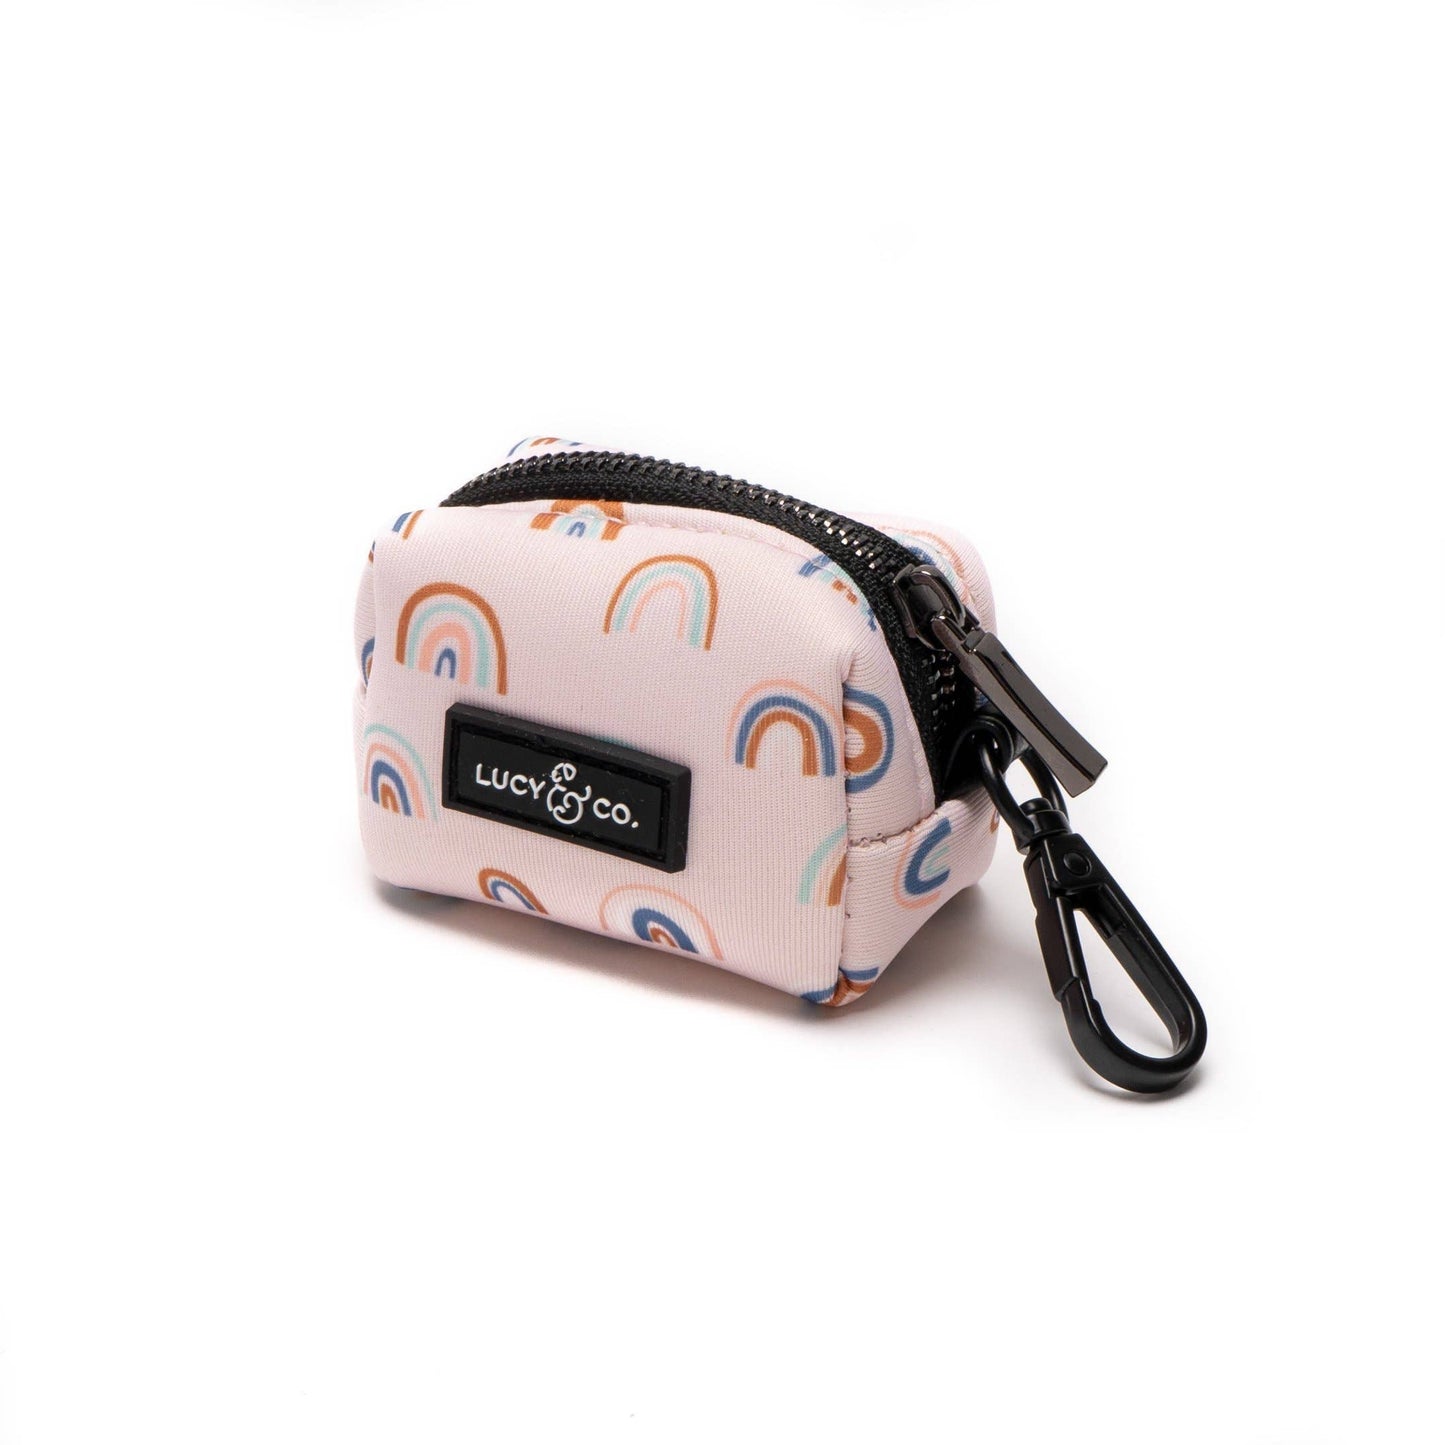 Lucy & Co. - The In the Clouds Poop Bag Holder